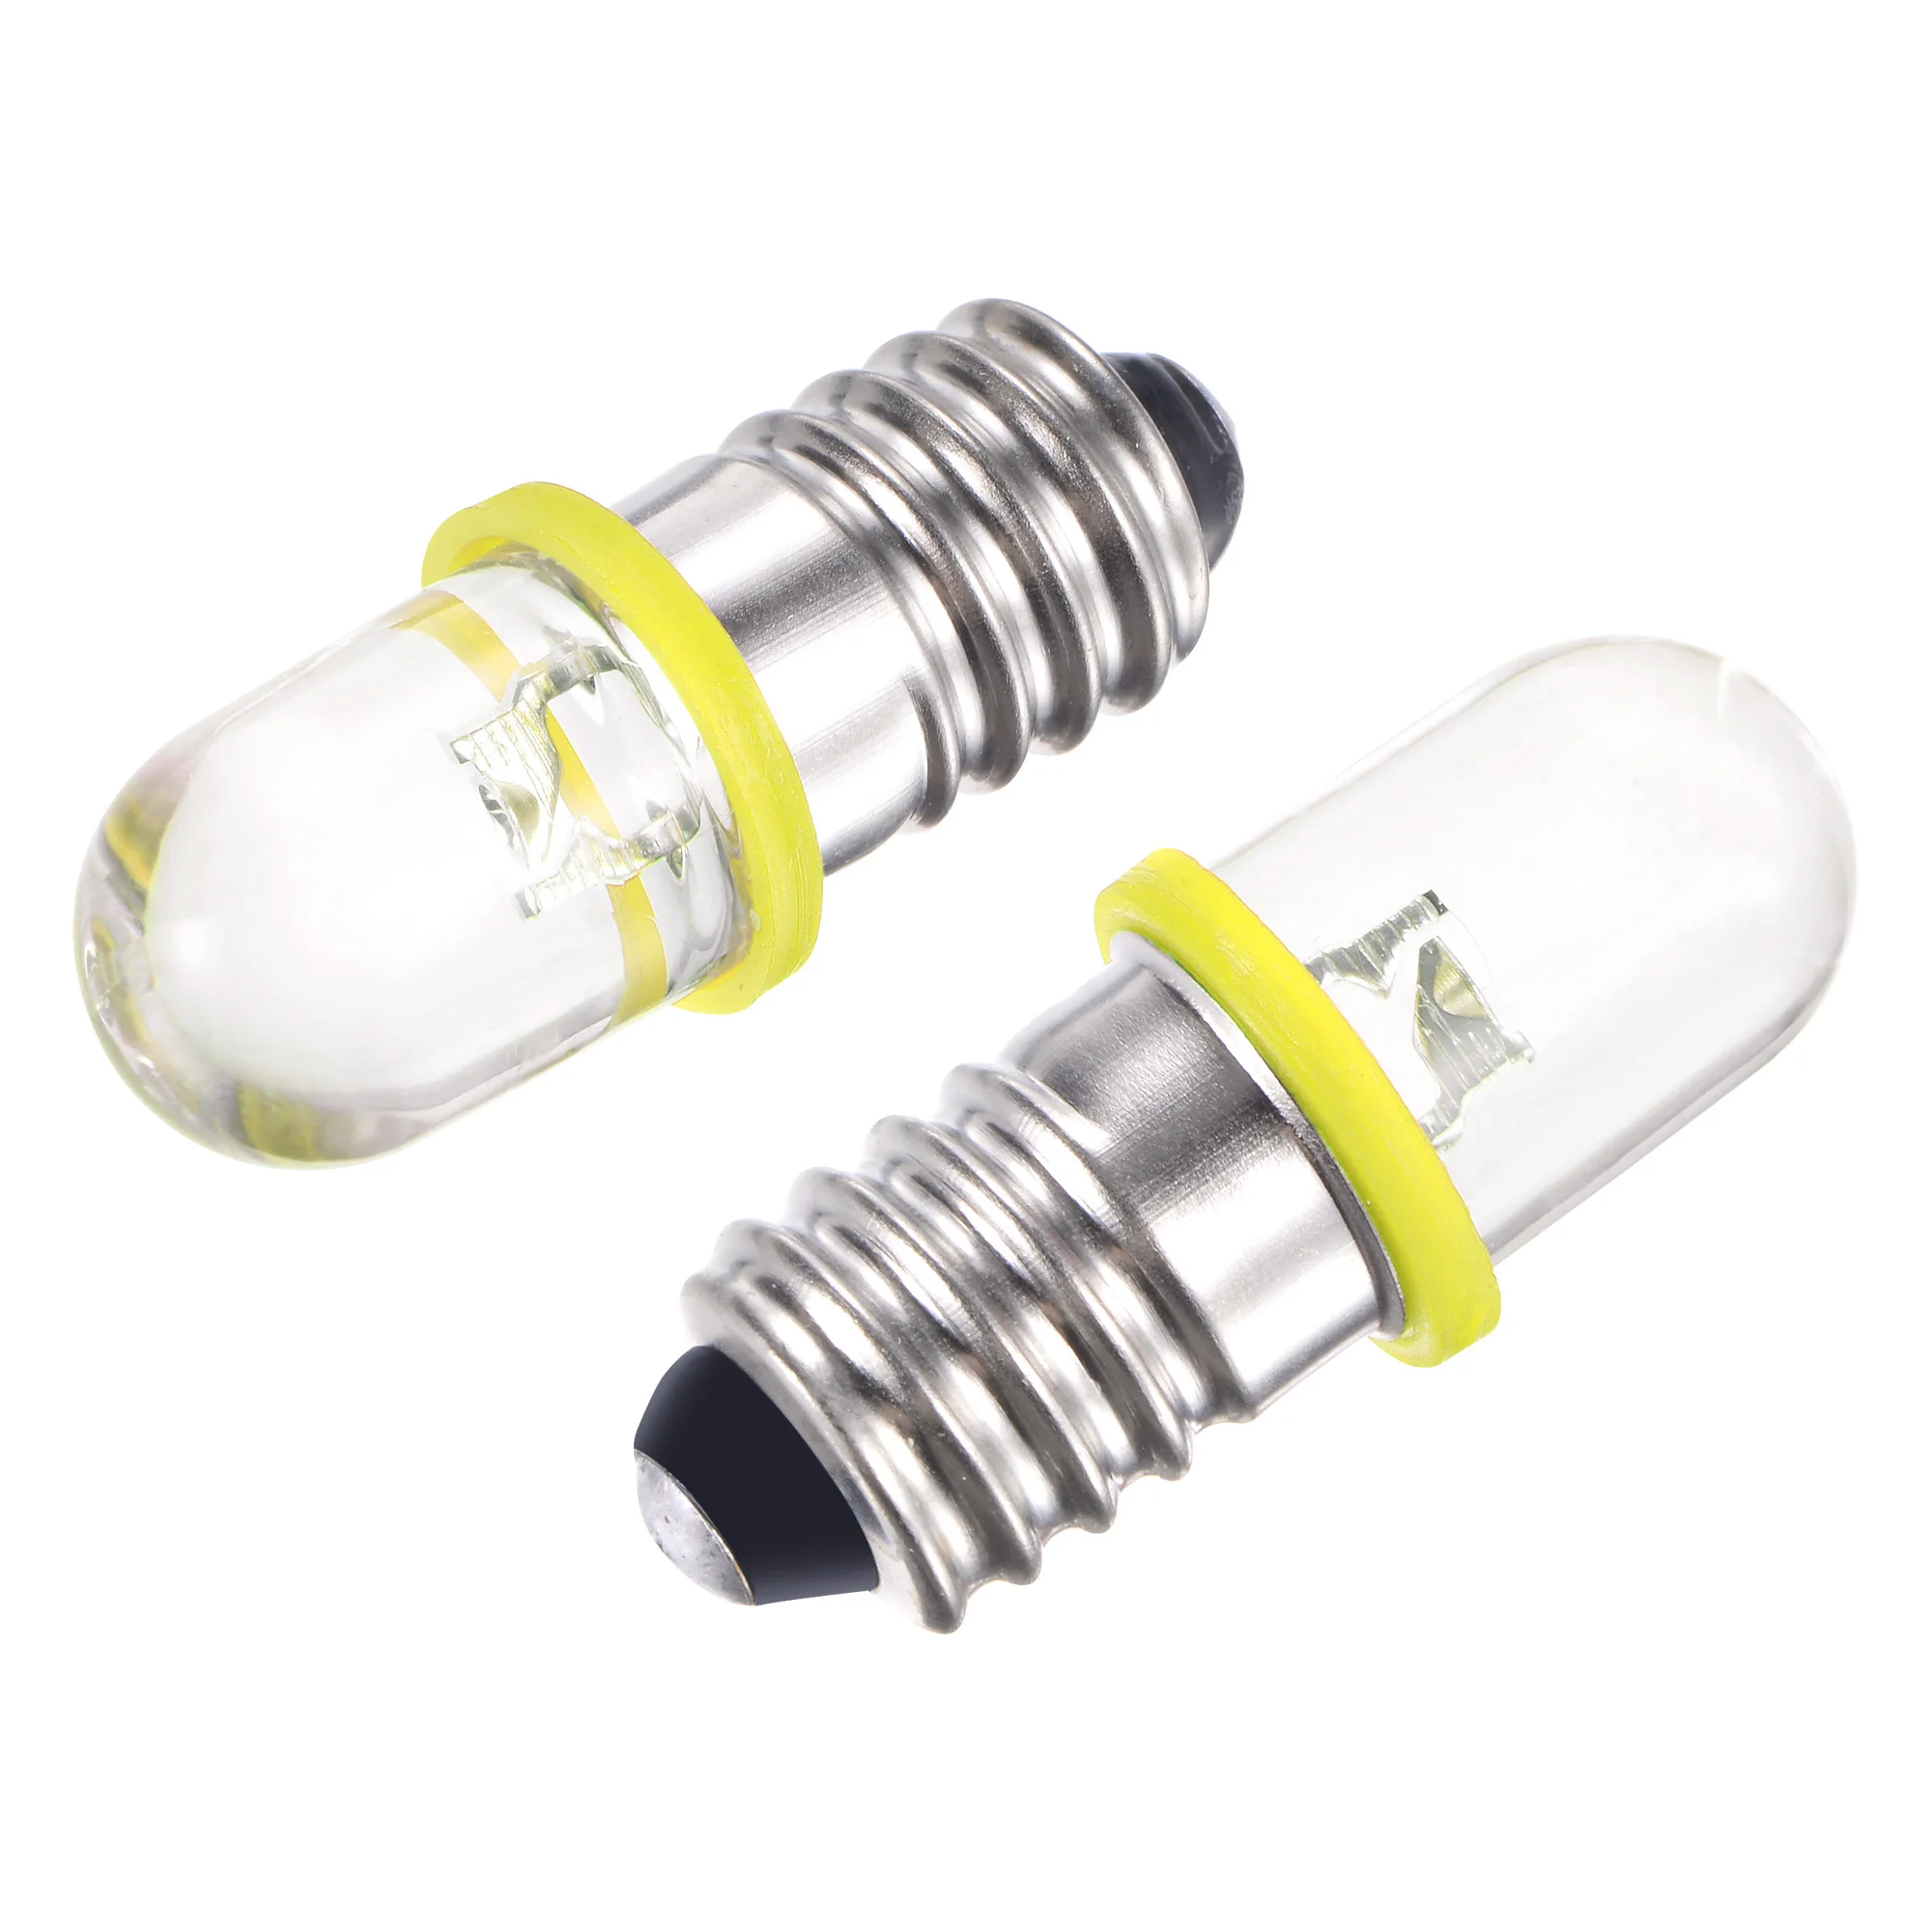 

Uxcell E10 Screw Base LED Bulb DC 3V 0.25W Round Top Mini Spot Light with Storage Box, Yellow Pack of 10